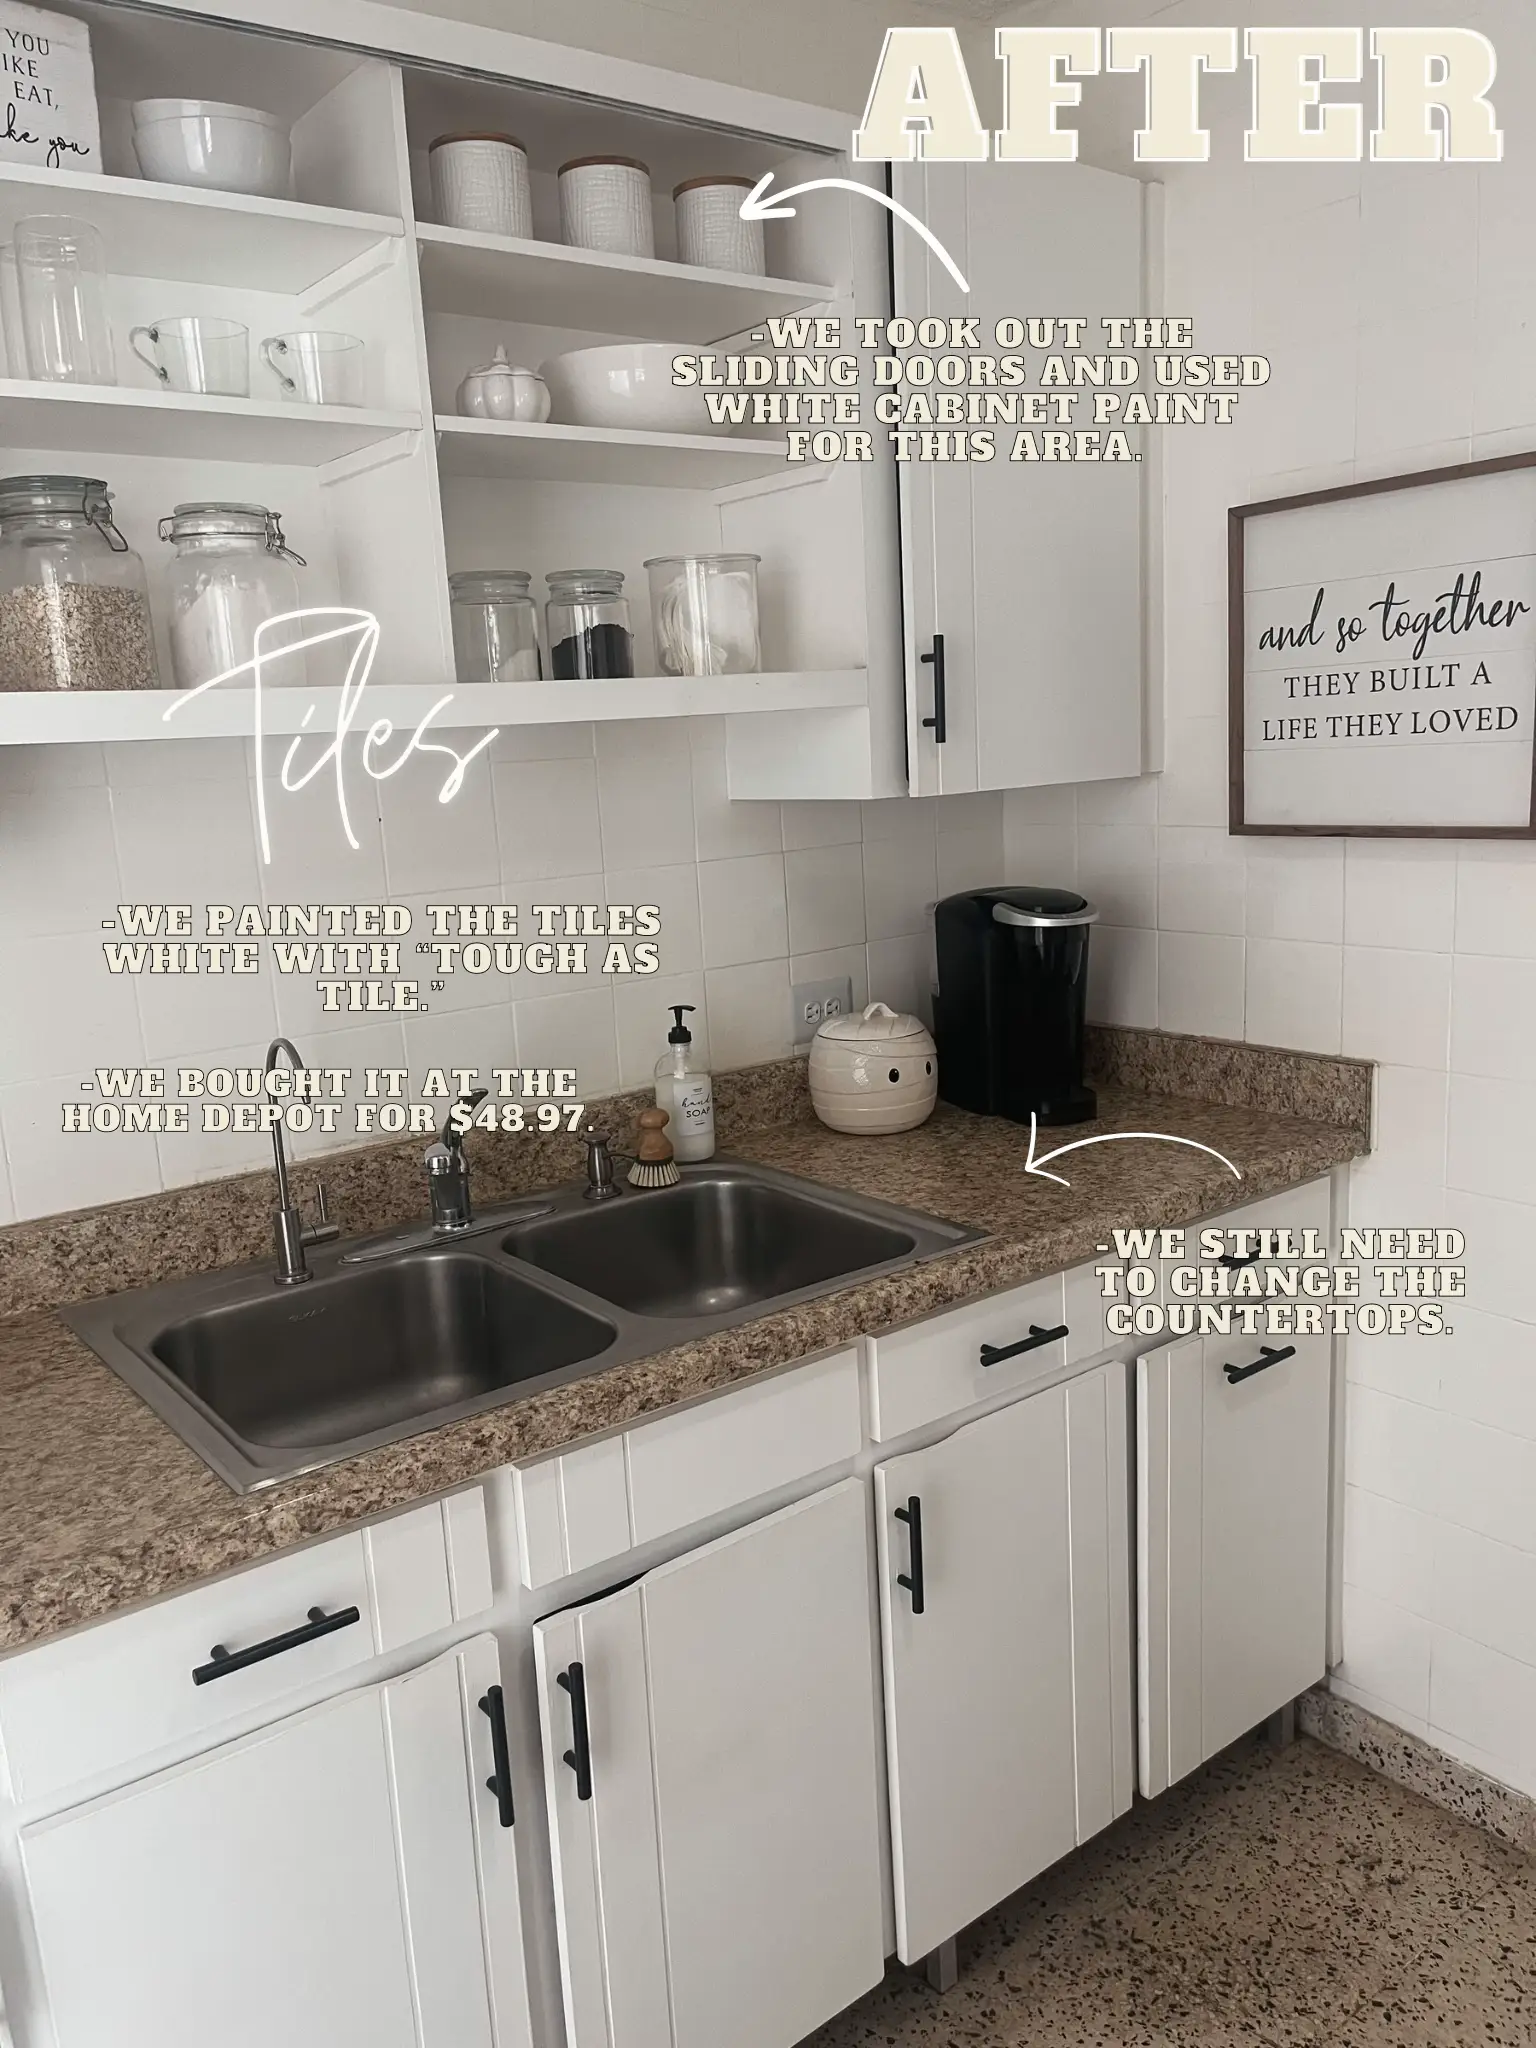 Updating Your Kitchen on a Budget with Contact Paper